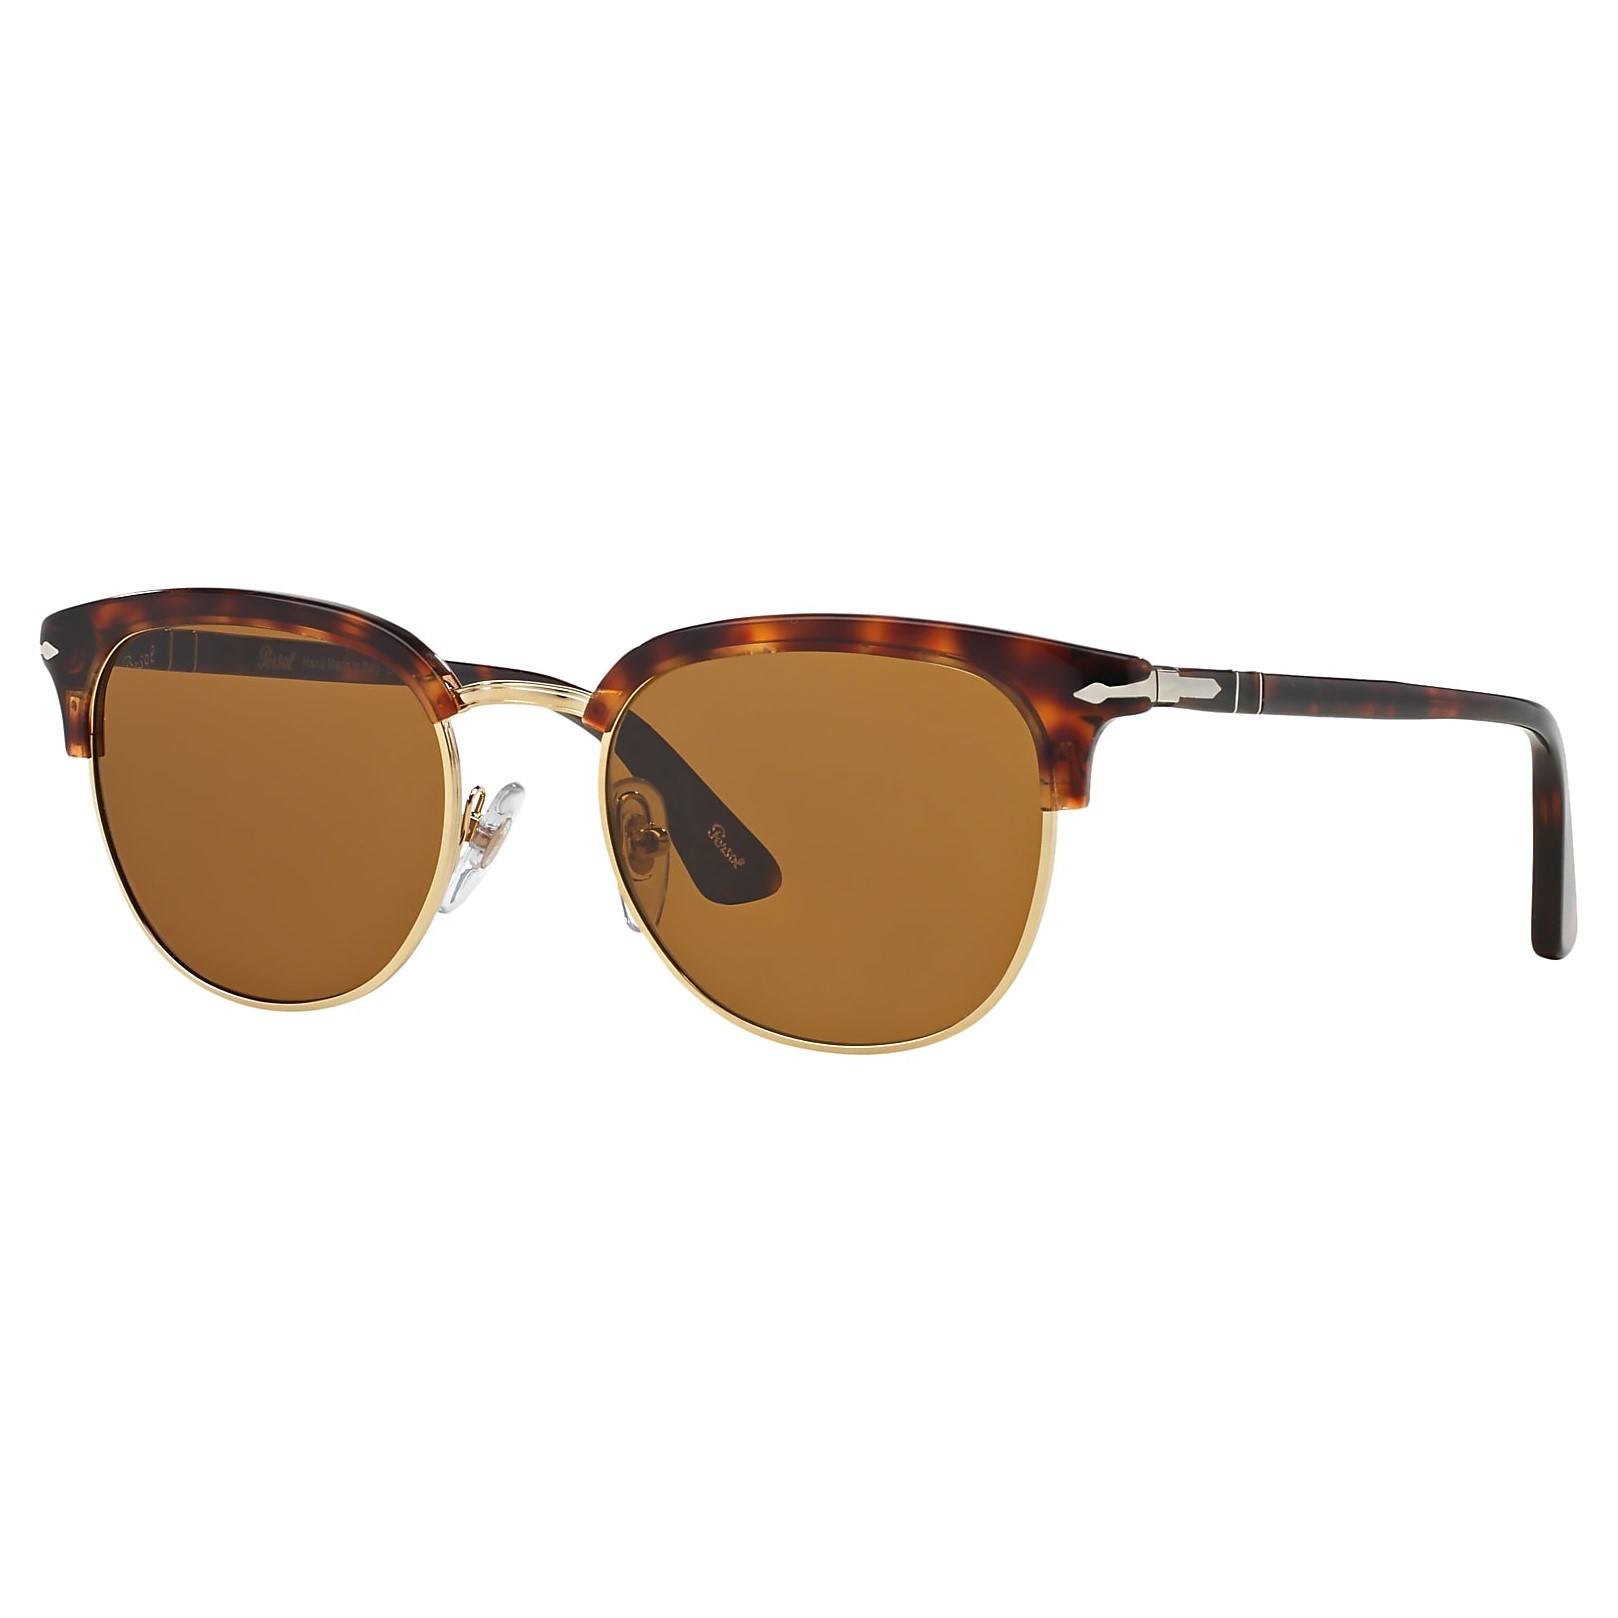 Persol Sunglasses Review - Must Read This Before Buying